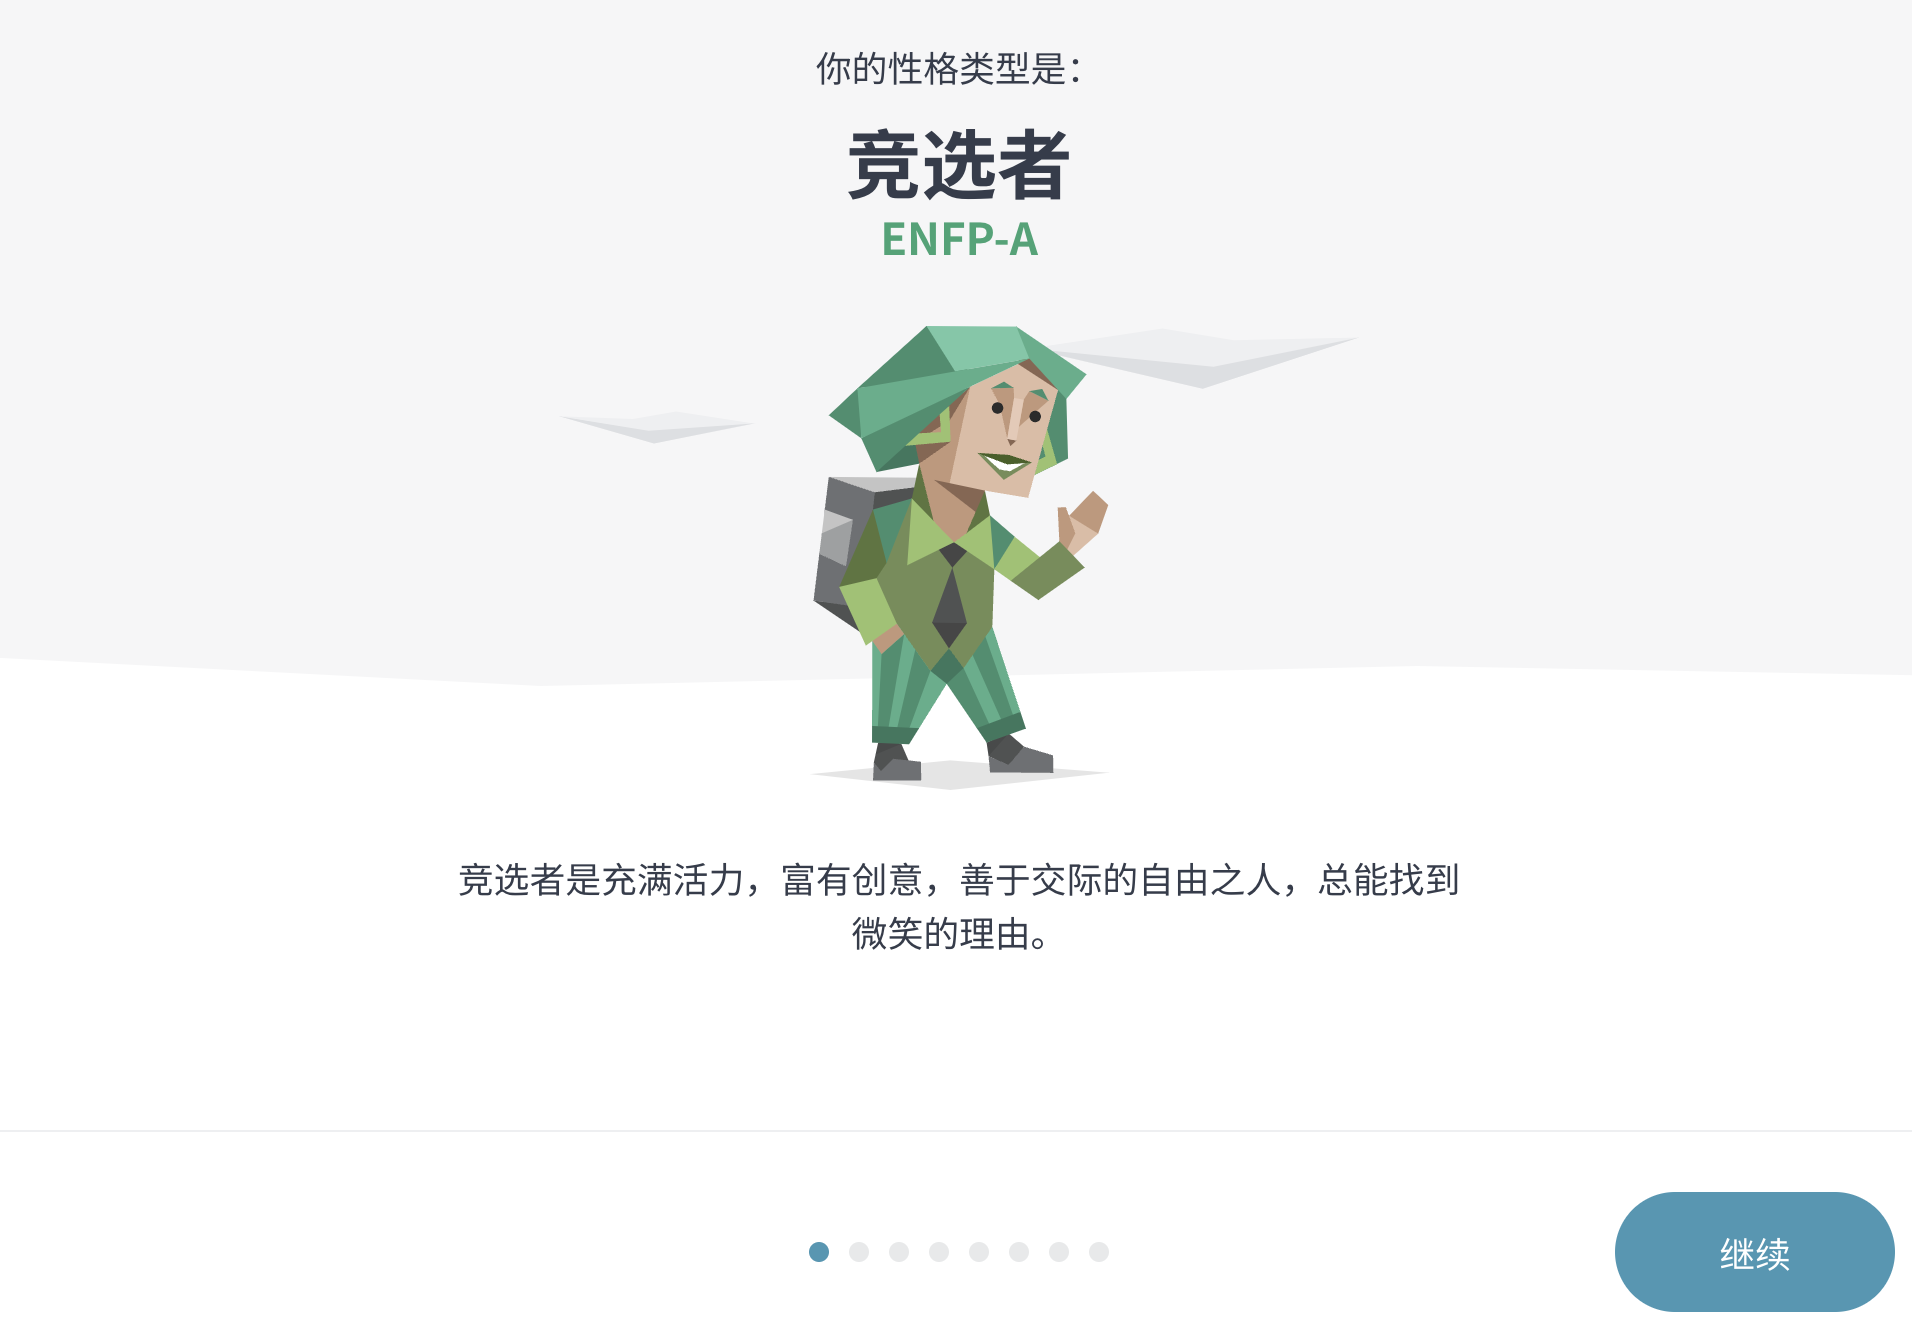 ENFP-A